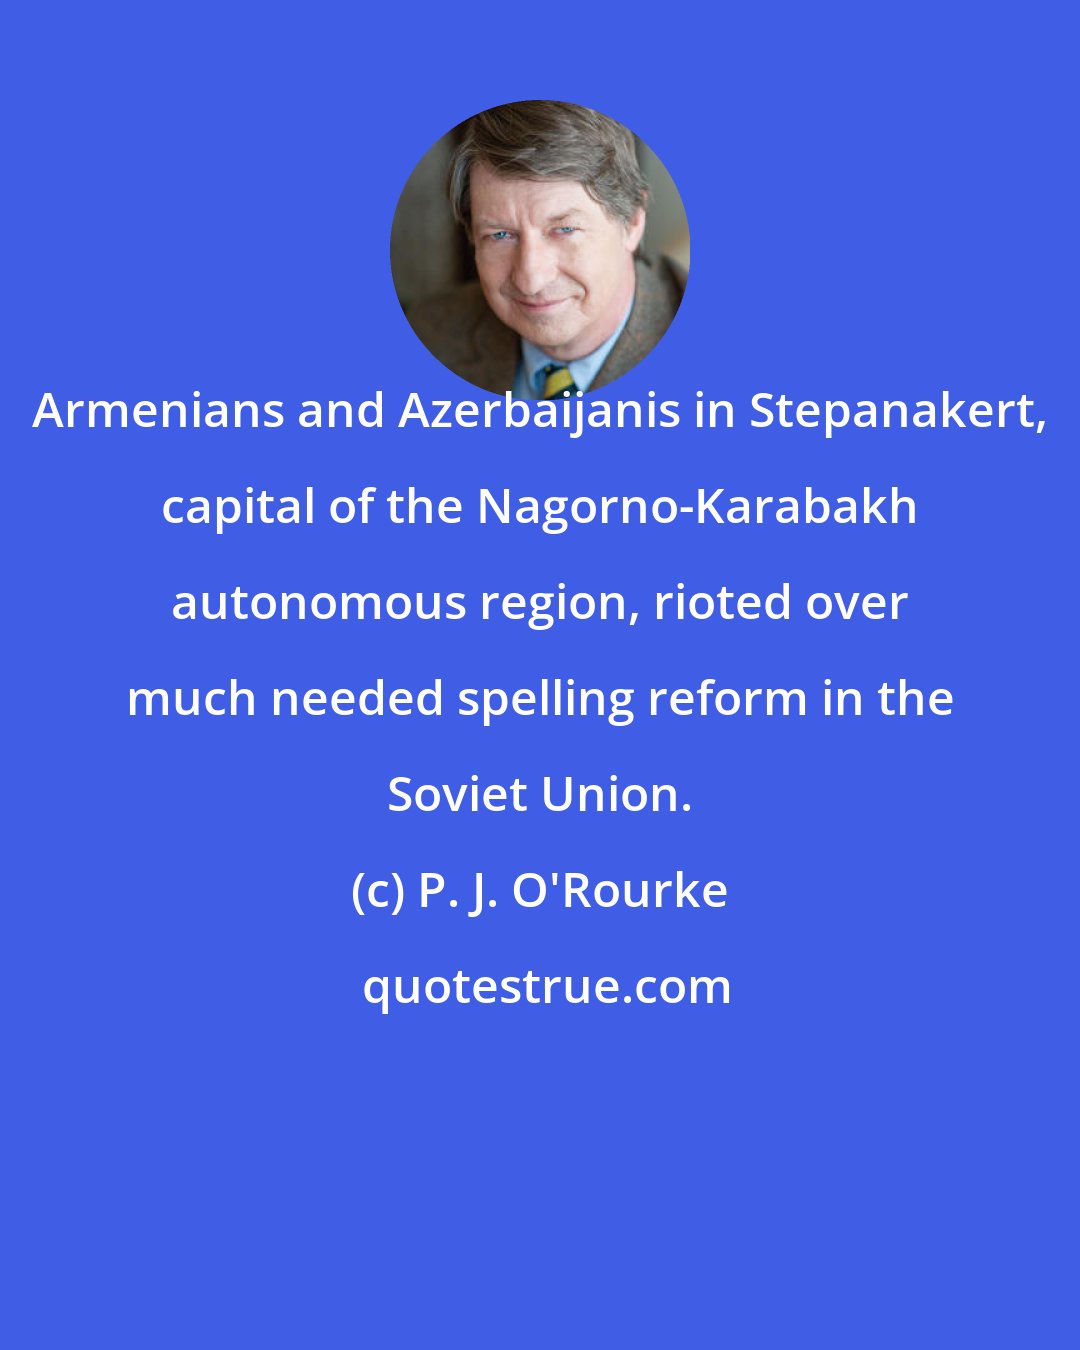 P. J. O'Rourke: Armenians and Azerbaijanis in Stepanakert, capital of the Nagorno-Karabakh autonomous region, rioted over much needed spelling reform in the Soviet Union.